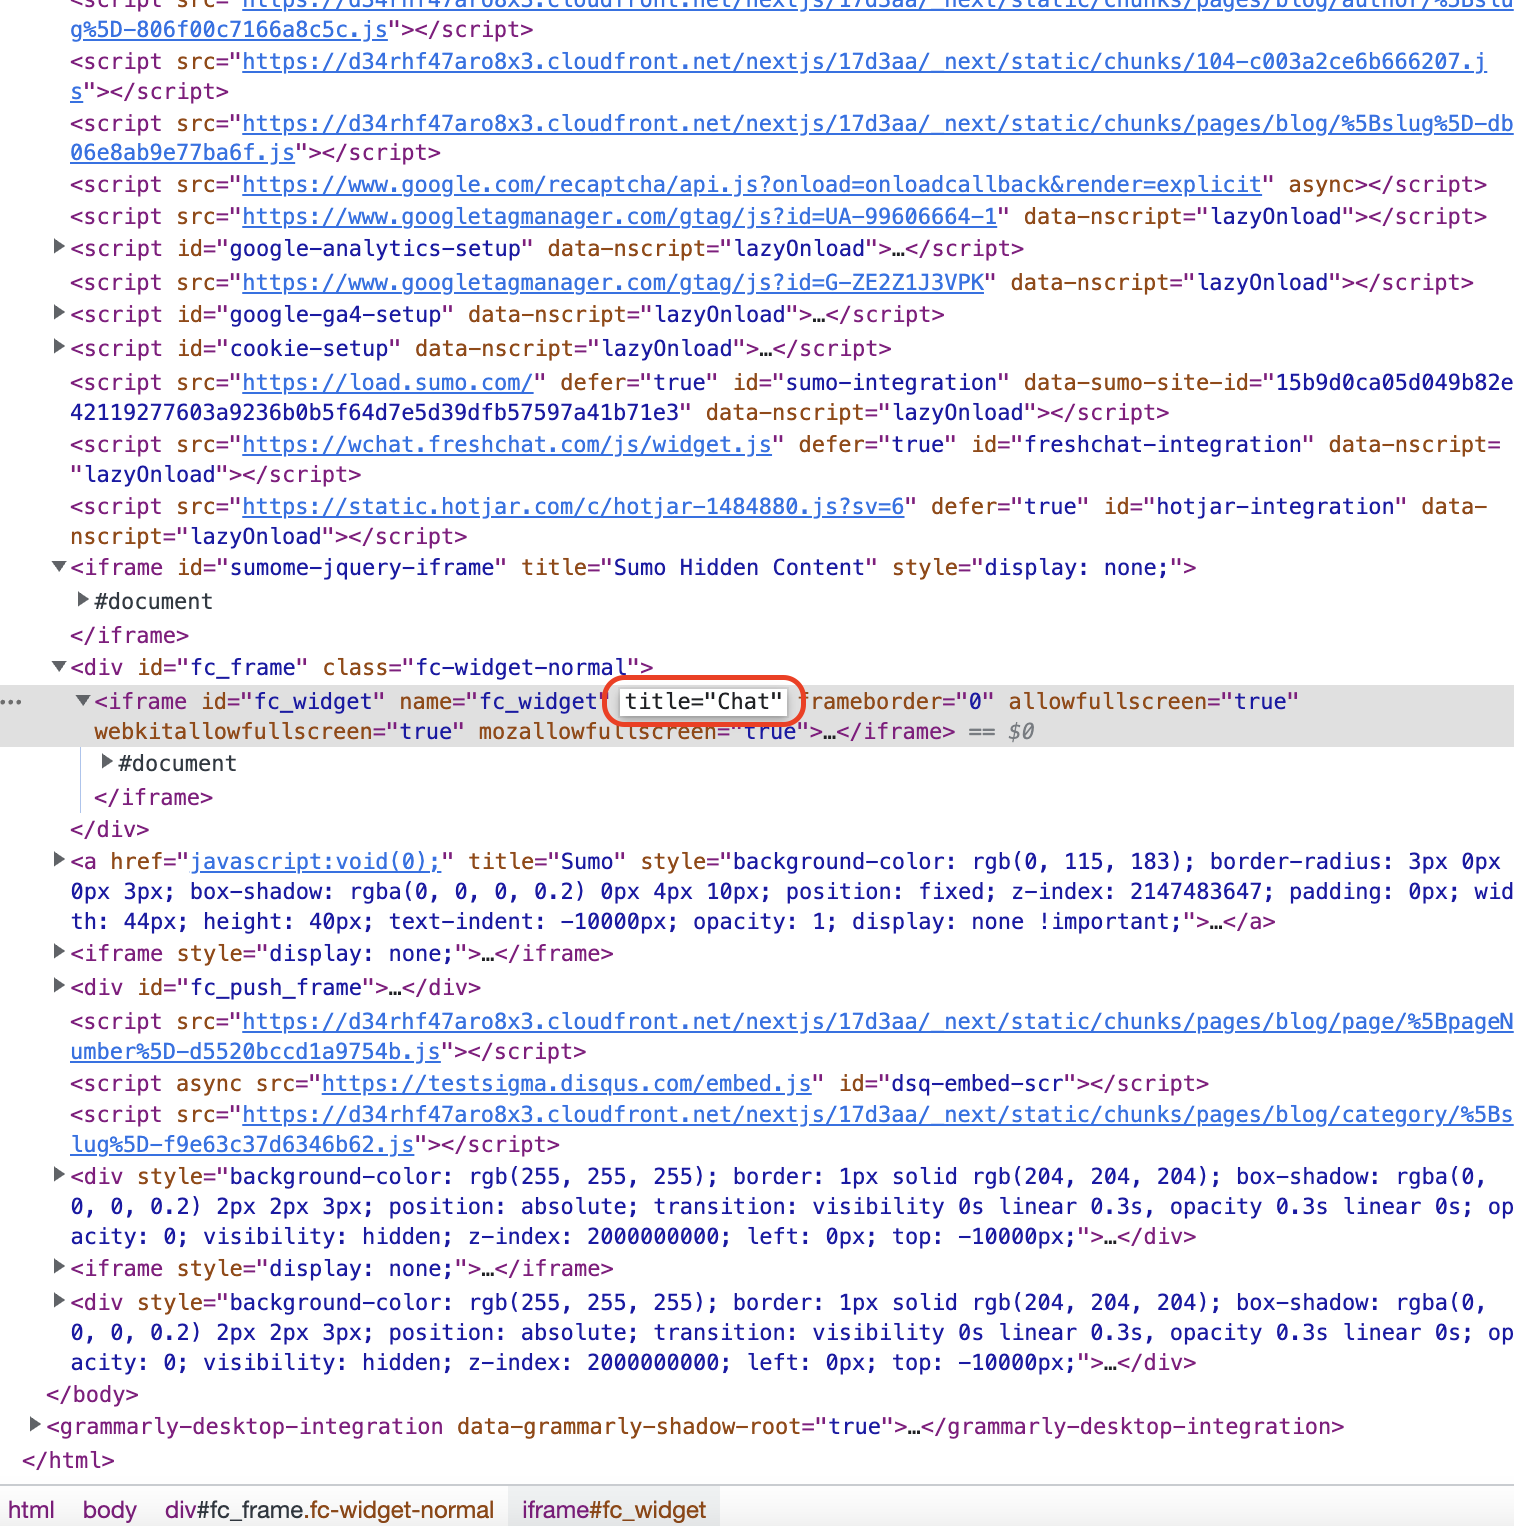 The following image shows a developer editing an HTML value from the web inspector: